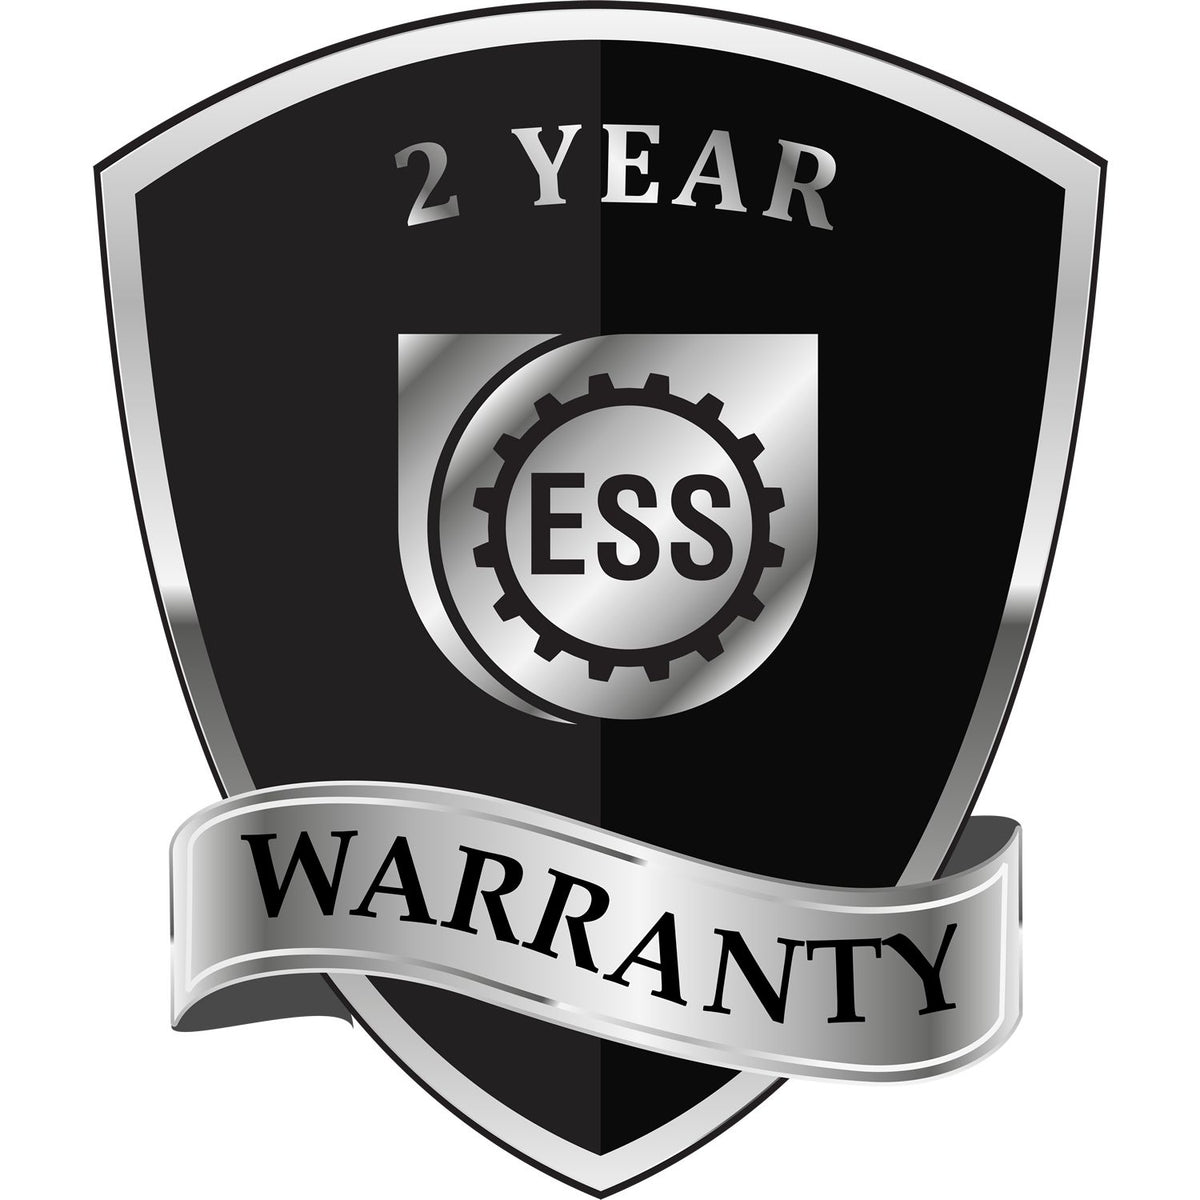 A black and silver badge or emblem showing warranty information for the Gift Idaho Architect Seal